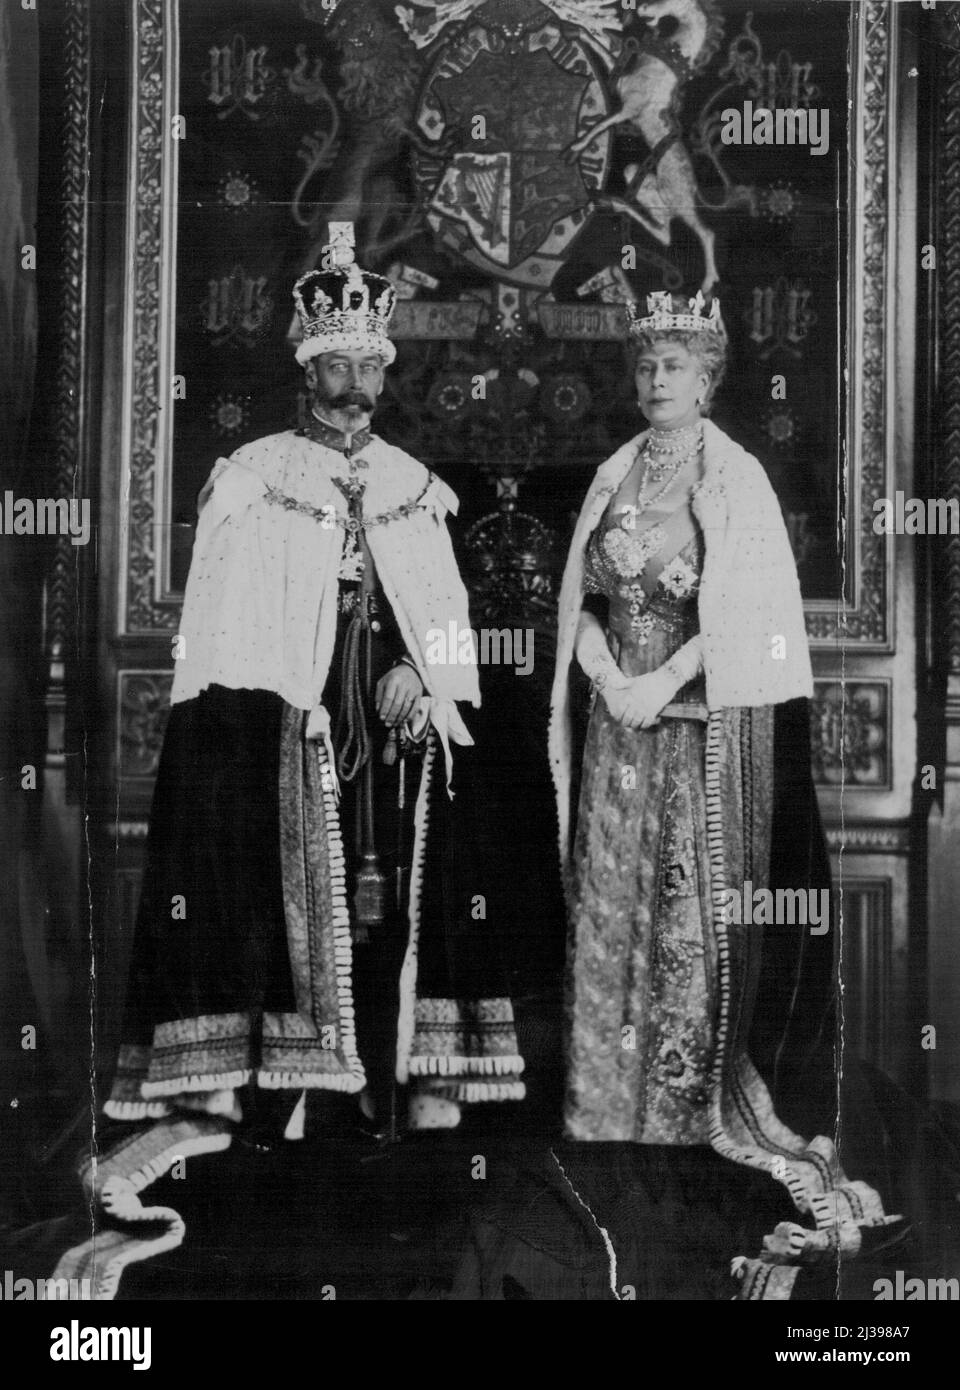 Their Majesties the King and the Queen photographed in robes after the opening of parliament. May 6, 1935. (Photo by Vandyk). Stock Photo